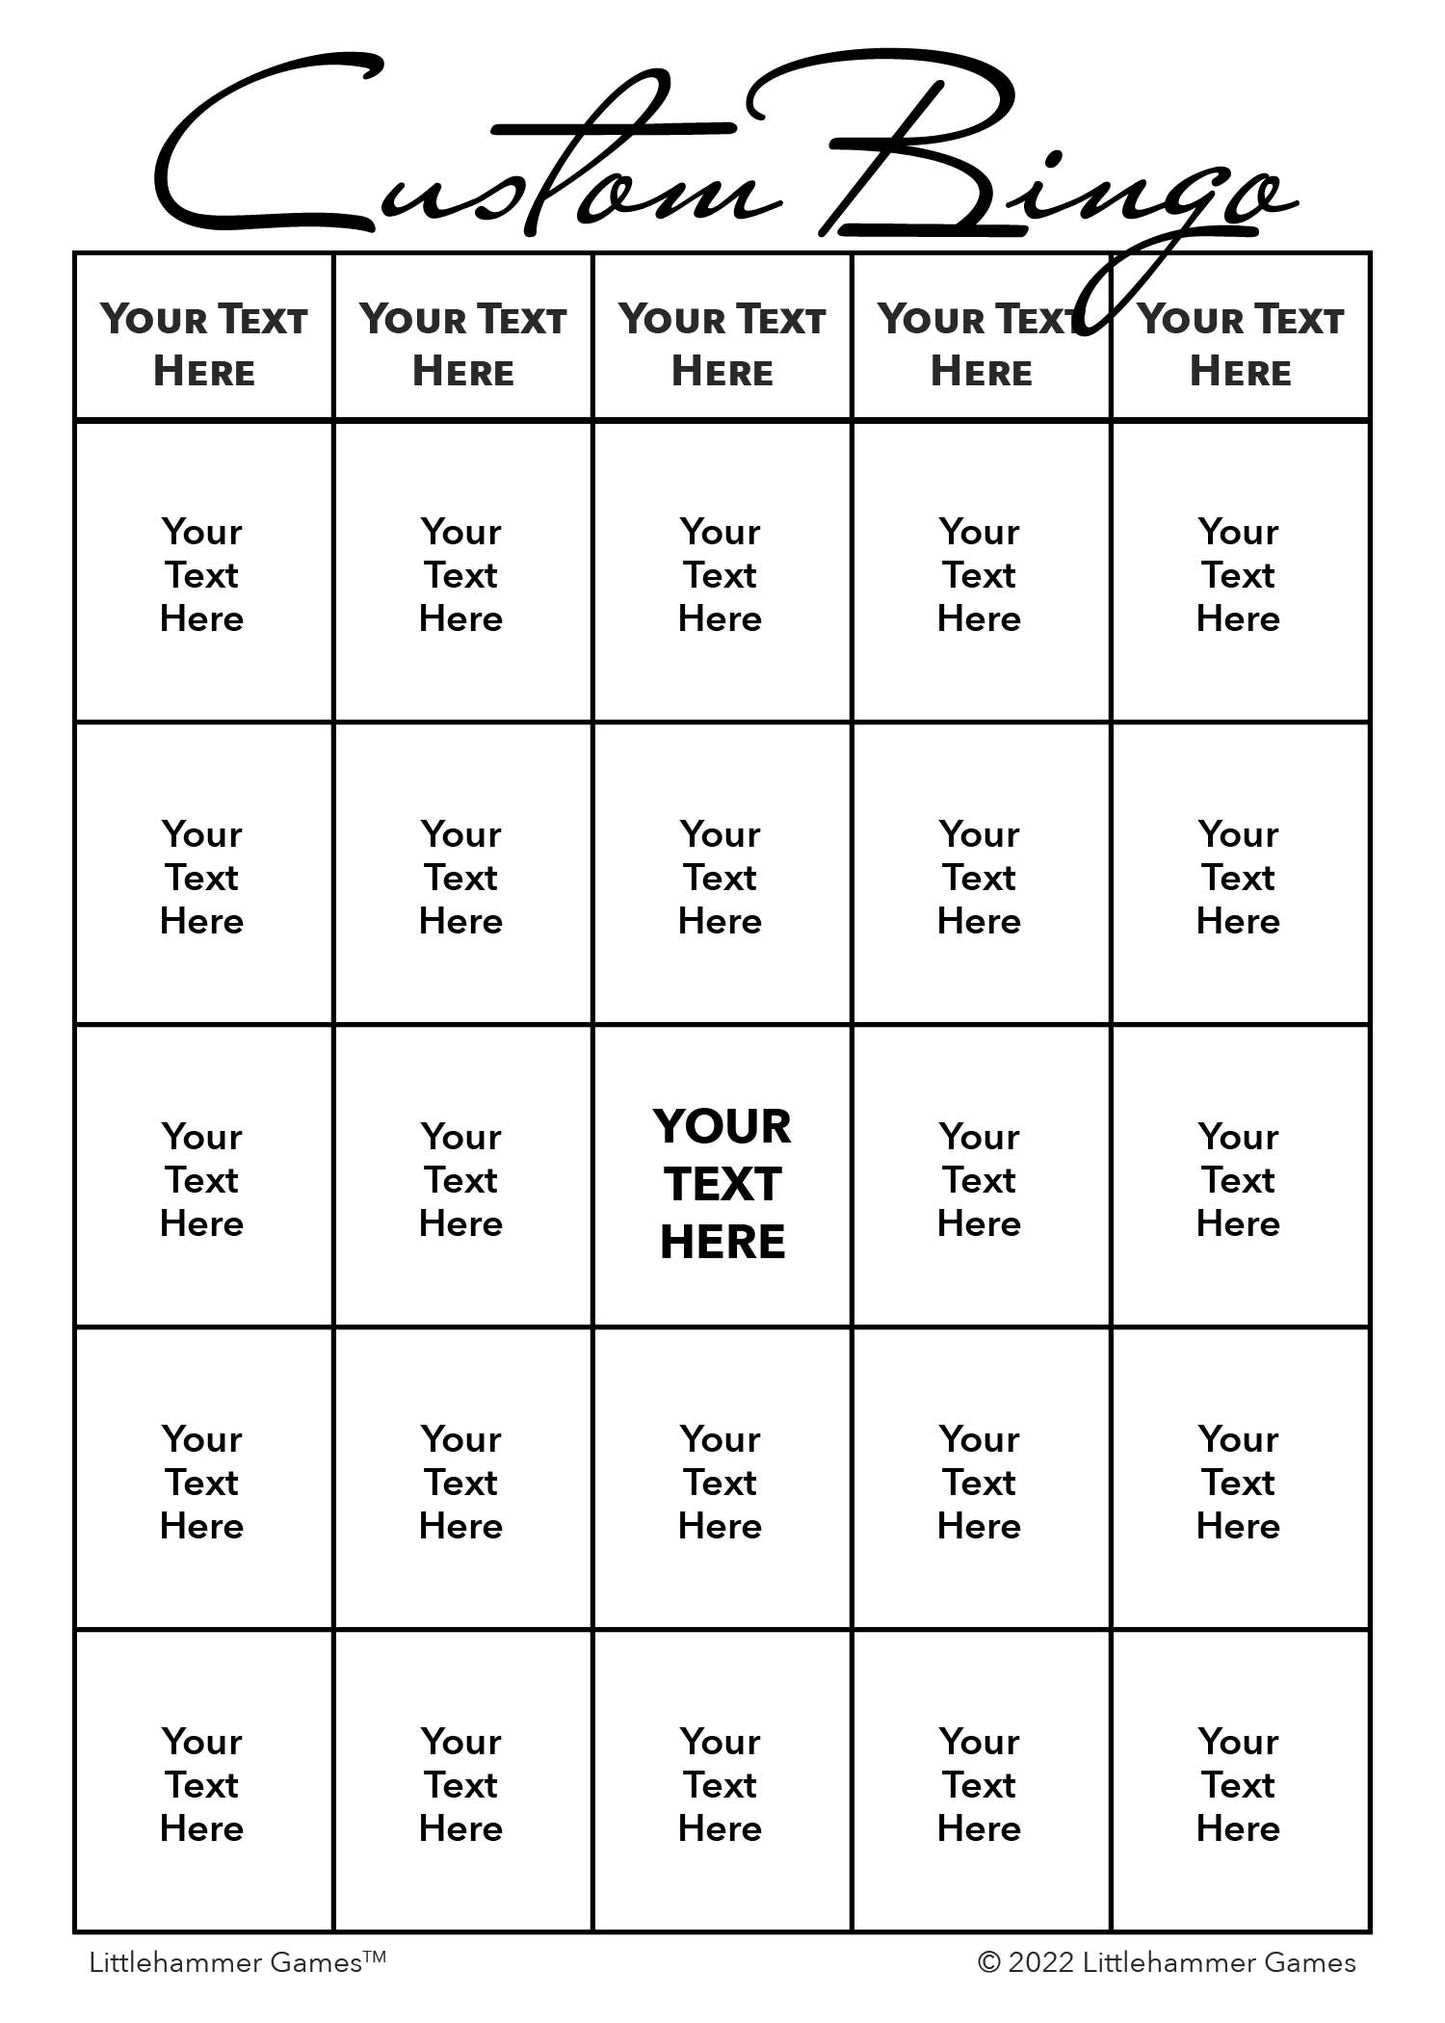 Custom Bingo game card with black text on a white background